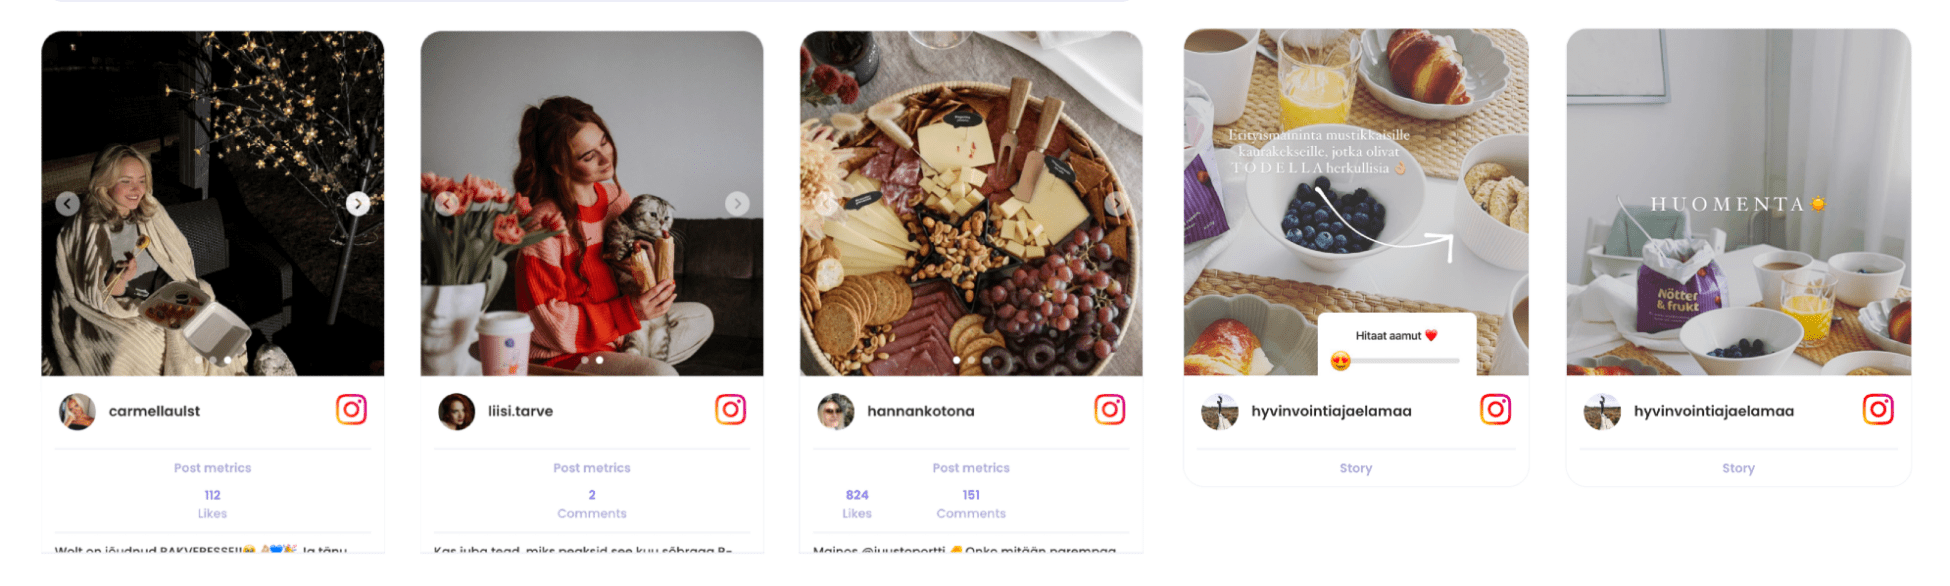 influencer content tracking – track influencer content on Instagram